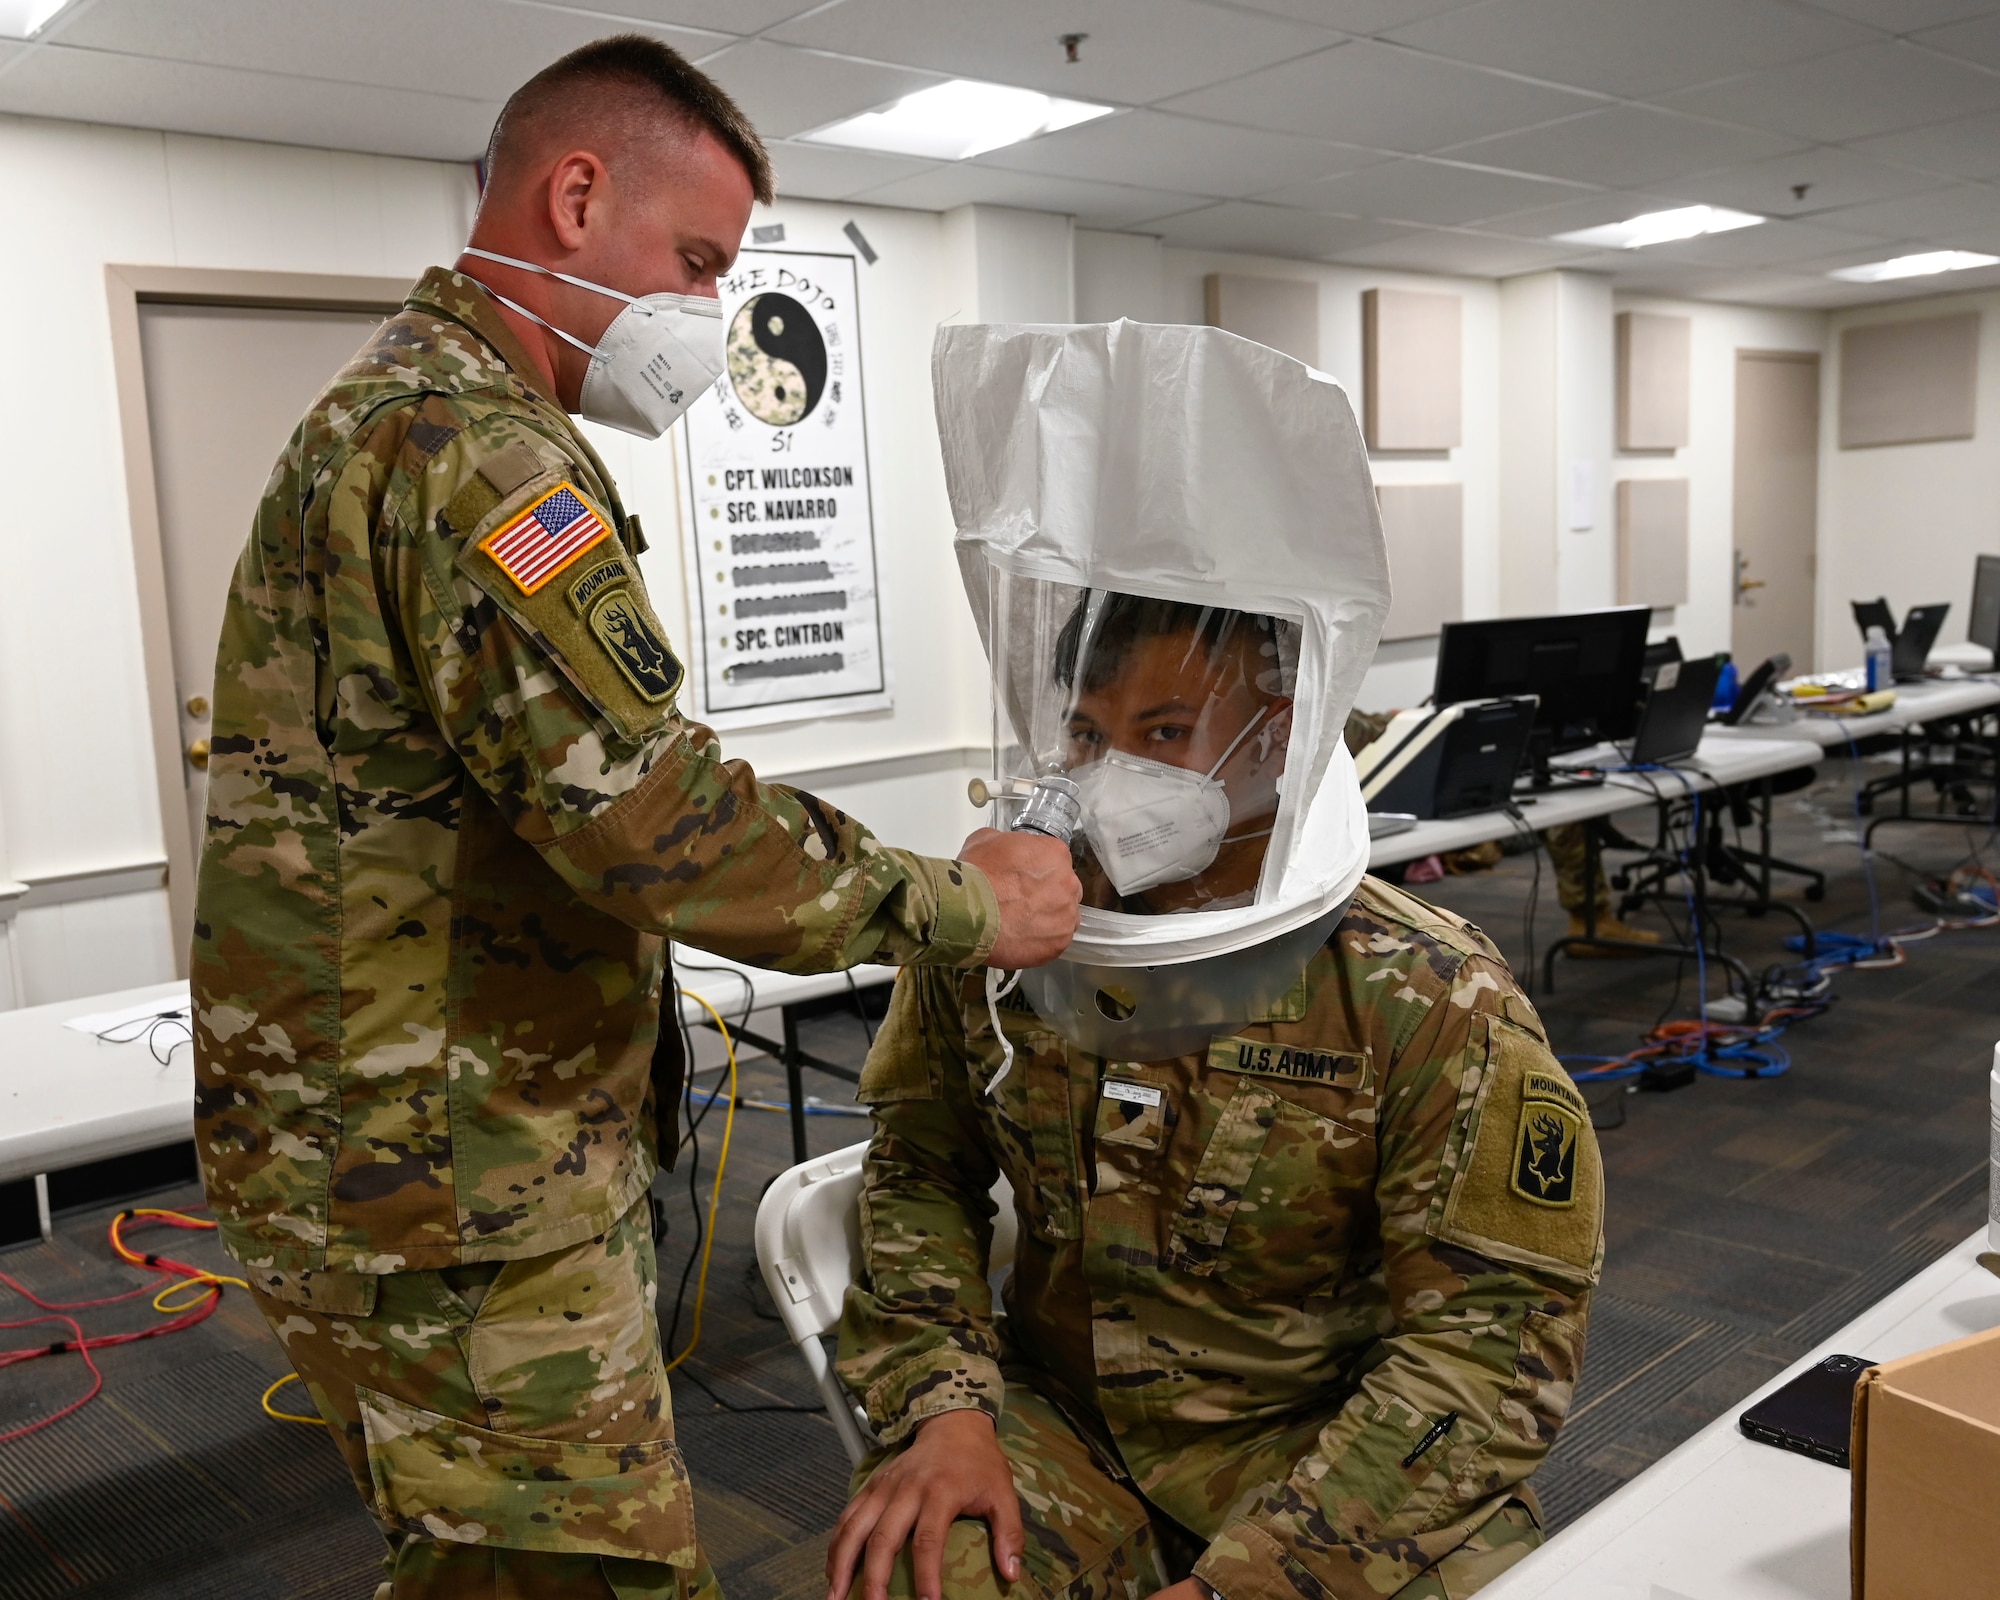 A member of the Connecticut Army National Guard gets fitted for a Tyvek suit in preparation for long-term care facility safety inspections, June 17, 2020, Hartford, Connecticut. The inspections, which were part of Connecticut's COVID-19 pandemic response, were conducted by teams of Connecticut National Guardsmen and DPH surveyors. (U.S. Air Natitonal Guard photo by Tech Sgt. Tamara R. Dabney)